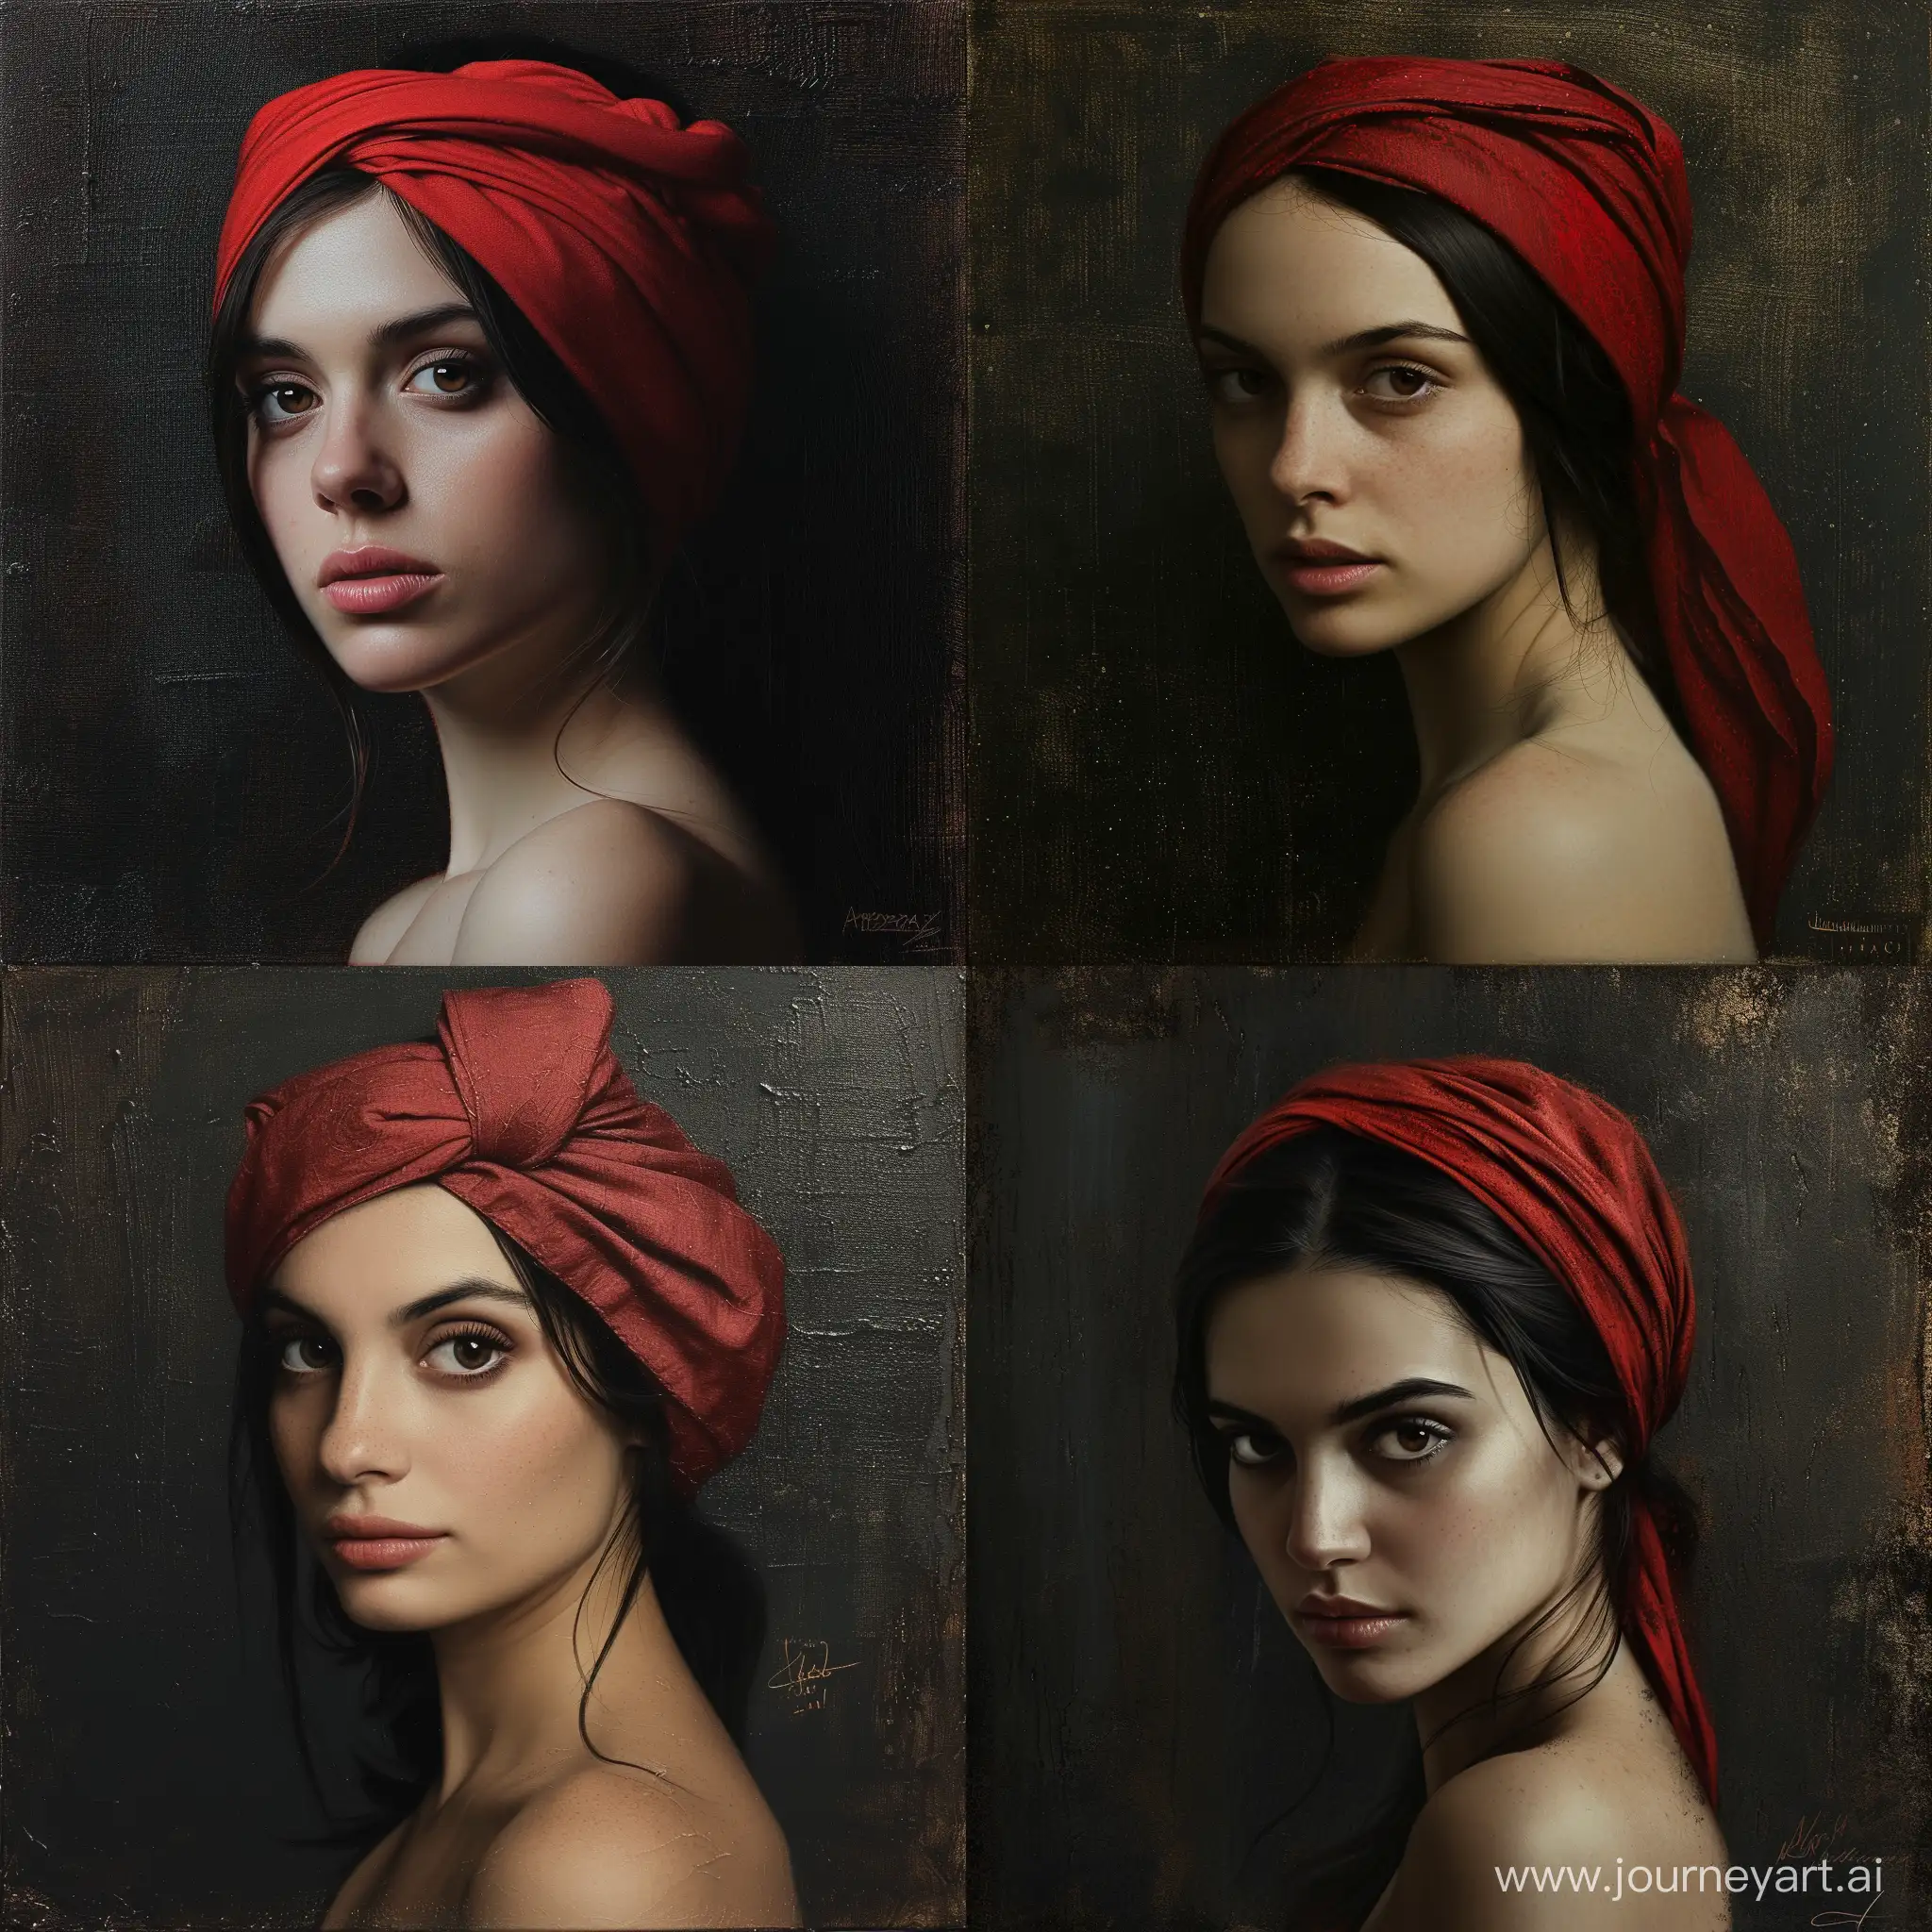 Contemplative-Woman-with-Red-Headband-Realistic-Portrait